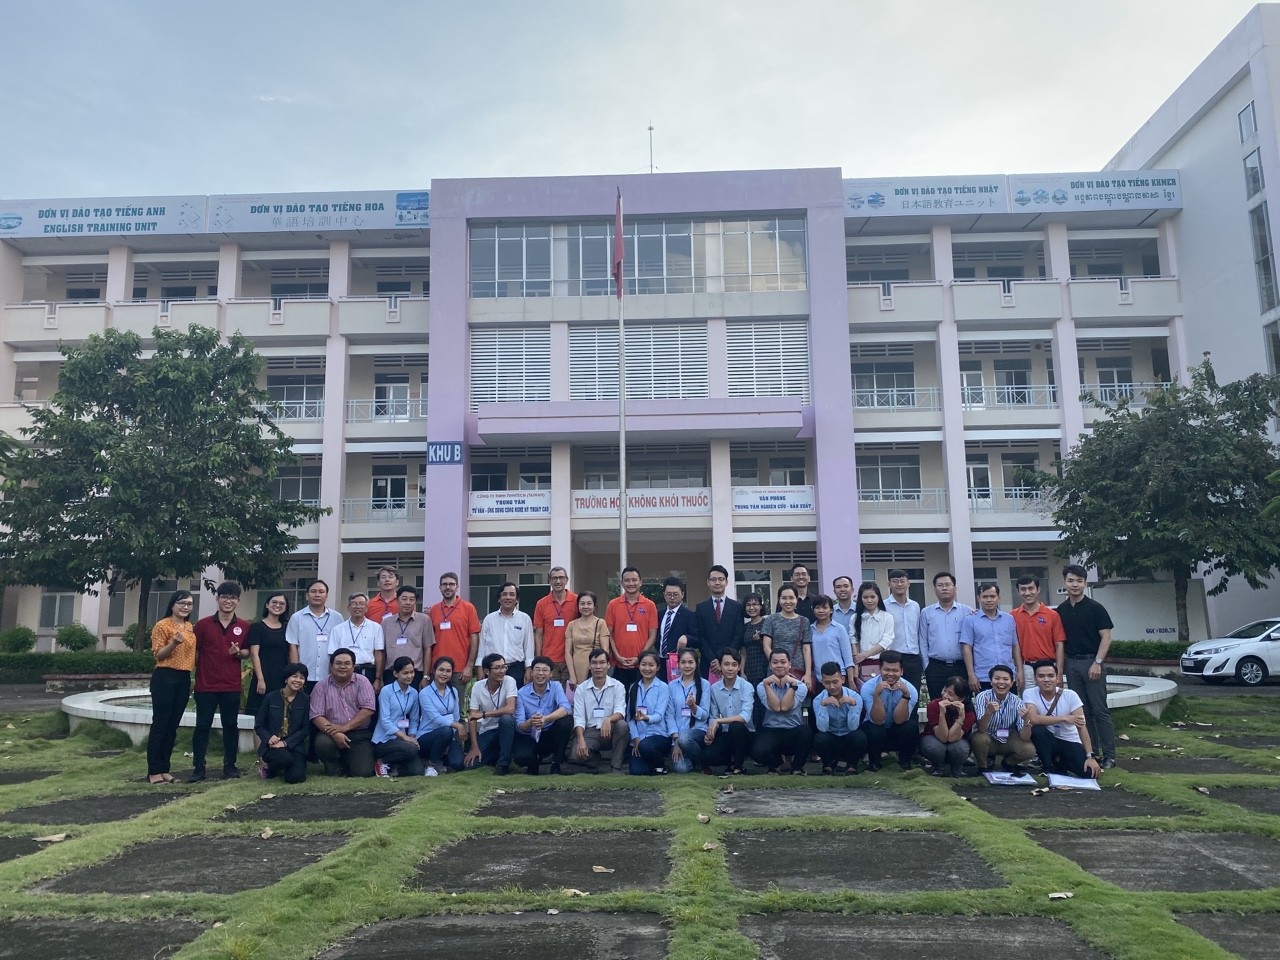 MEGA TO PROVIDE ULTRASOUND MACHINES FOR EMERGENCY RESUSCITATION TRAINING COURSE AT DONG THAP MEDICAL COLLEGE